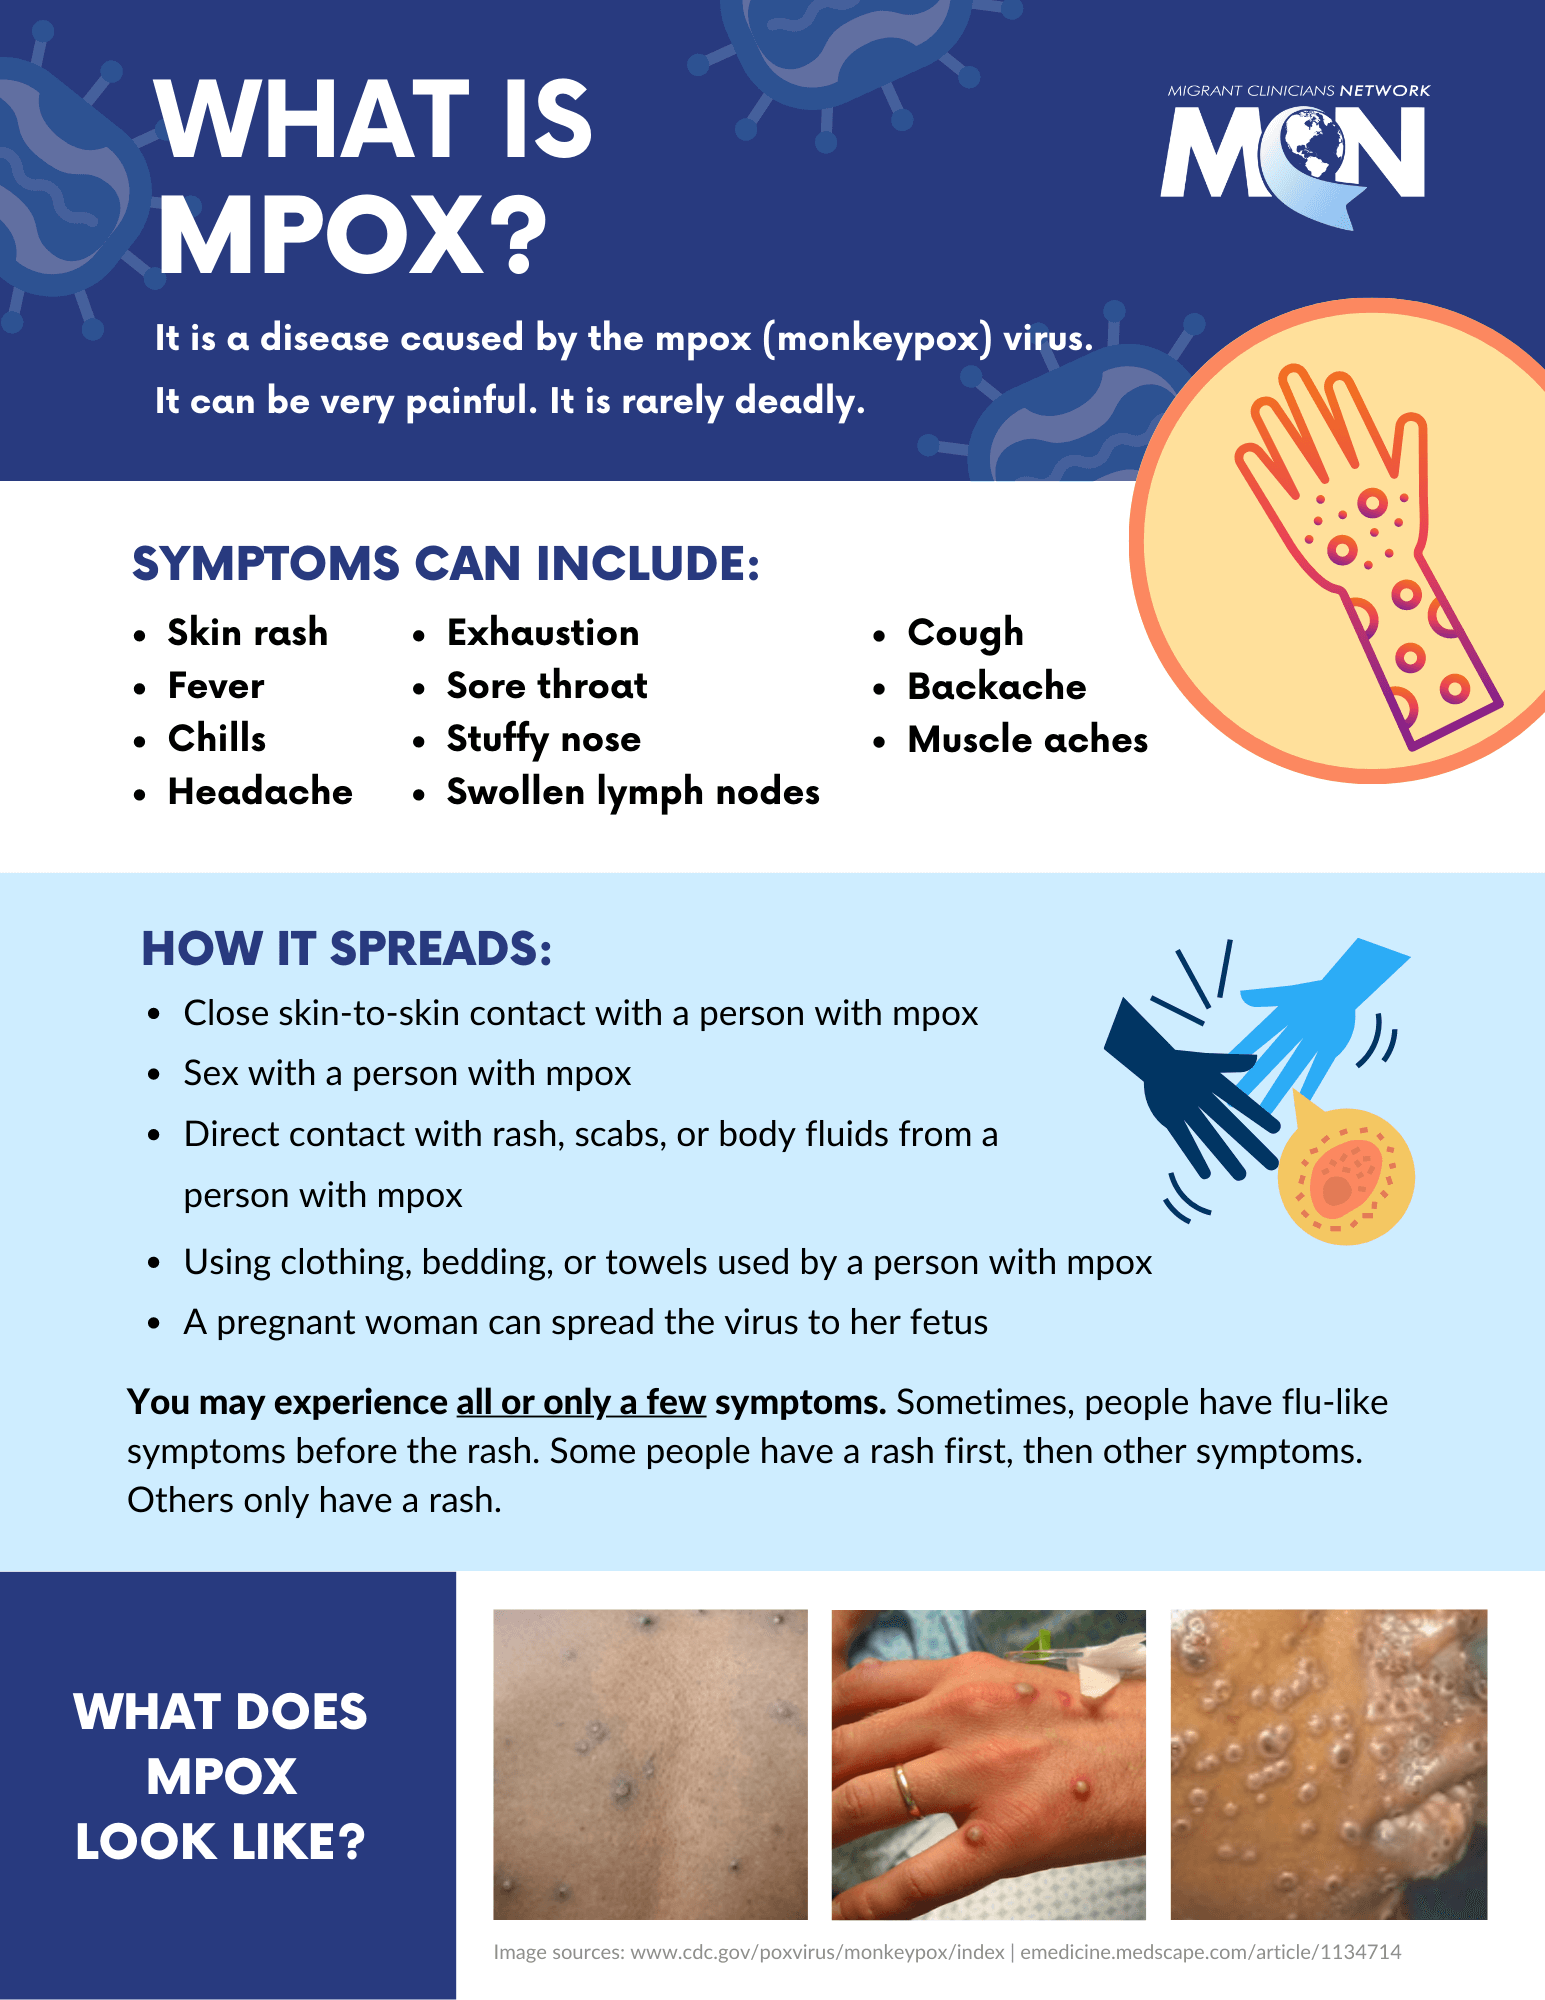 Factsheet with dark blue, light blue, and white background and Migrant Clinicians Network logo at top right corner. Information is divided into four horizontal sections with the following topics: What is monkeypox?; Symptoms; how it spreads; what does monkeypox look like? Photos of monkeypox rash and bumps on back, hand, and face are along the bottom.